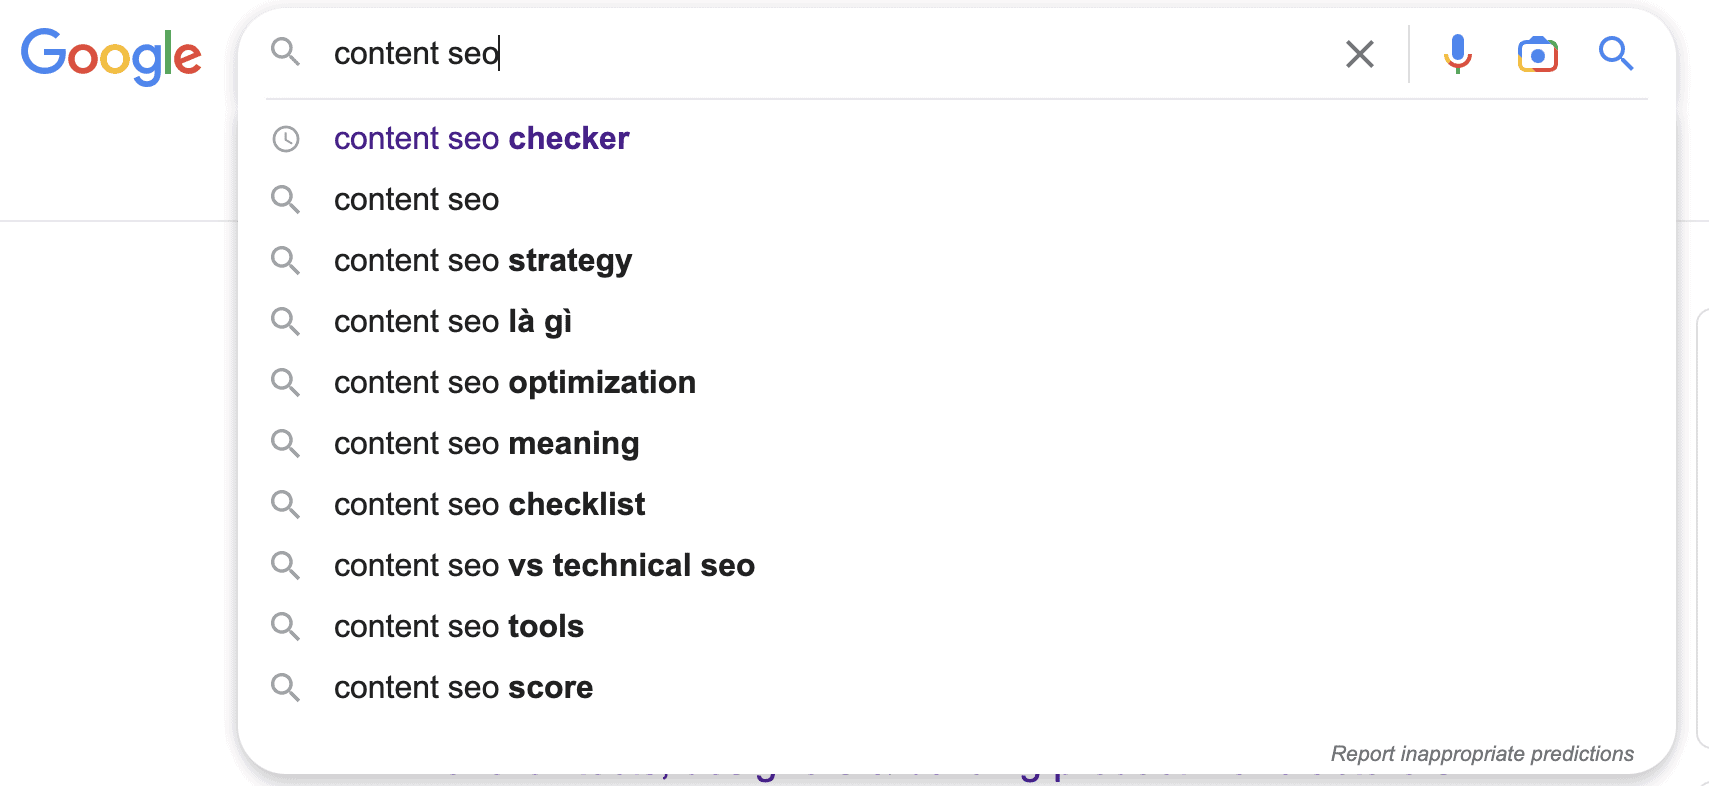 Suggested search results in Google search bar